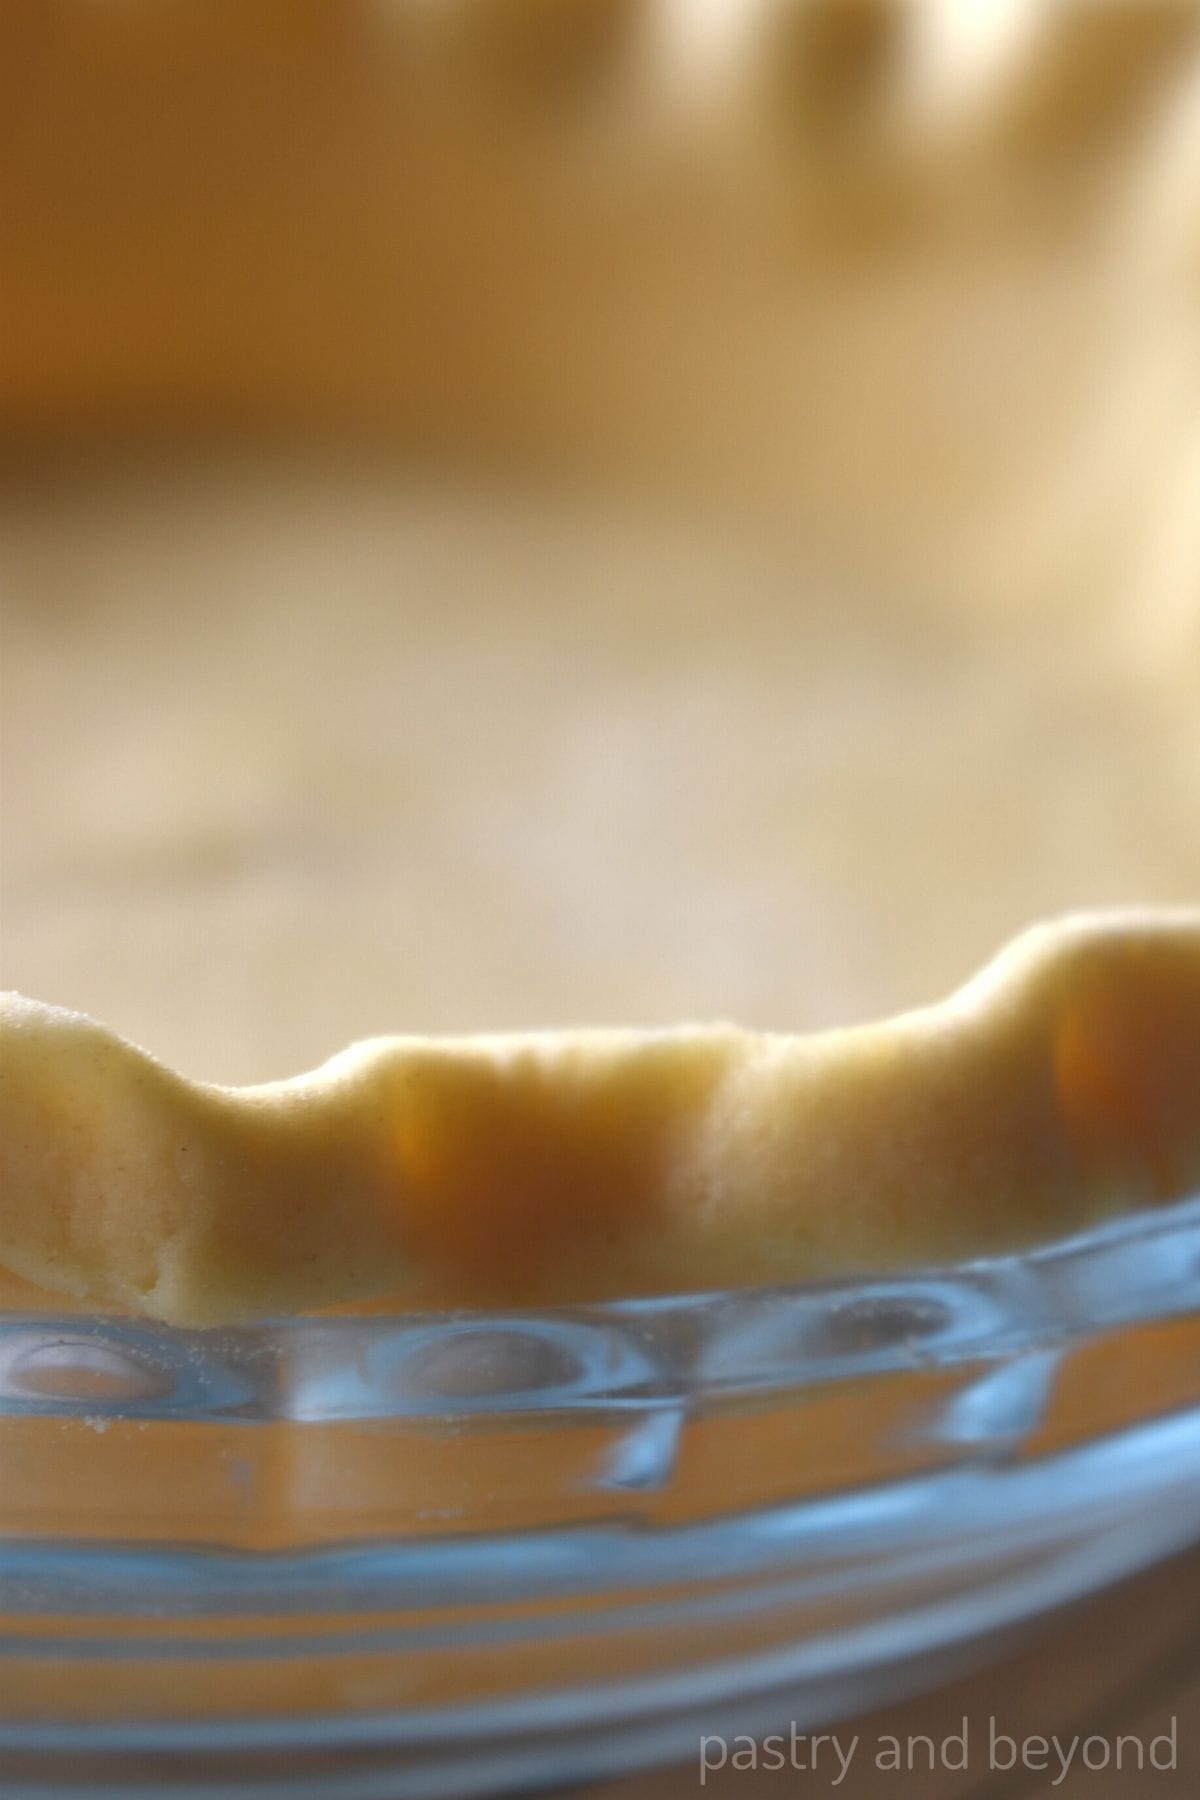 Pie dough on a pie dish with a fluted edge.